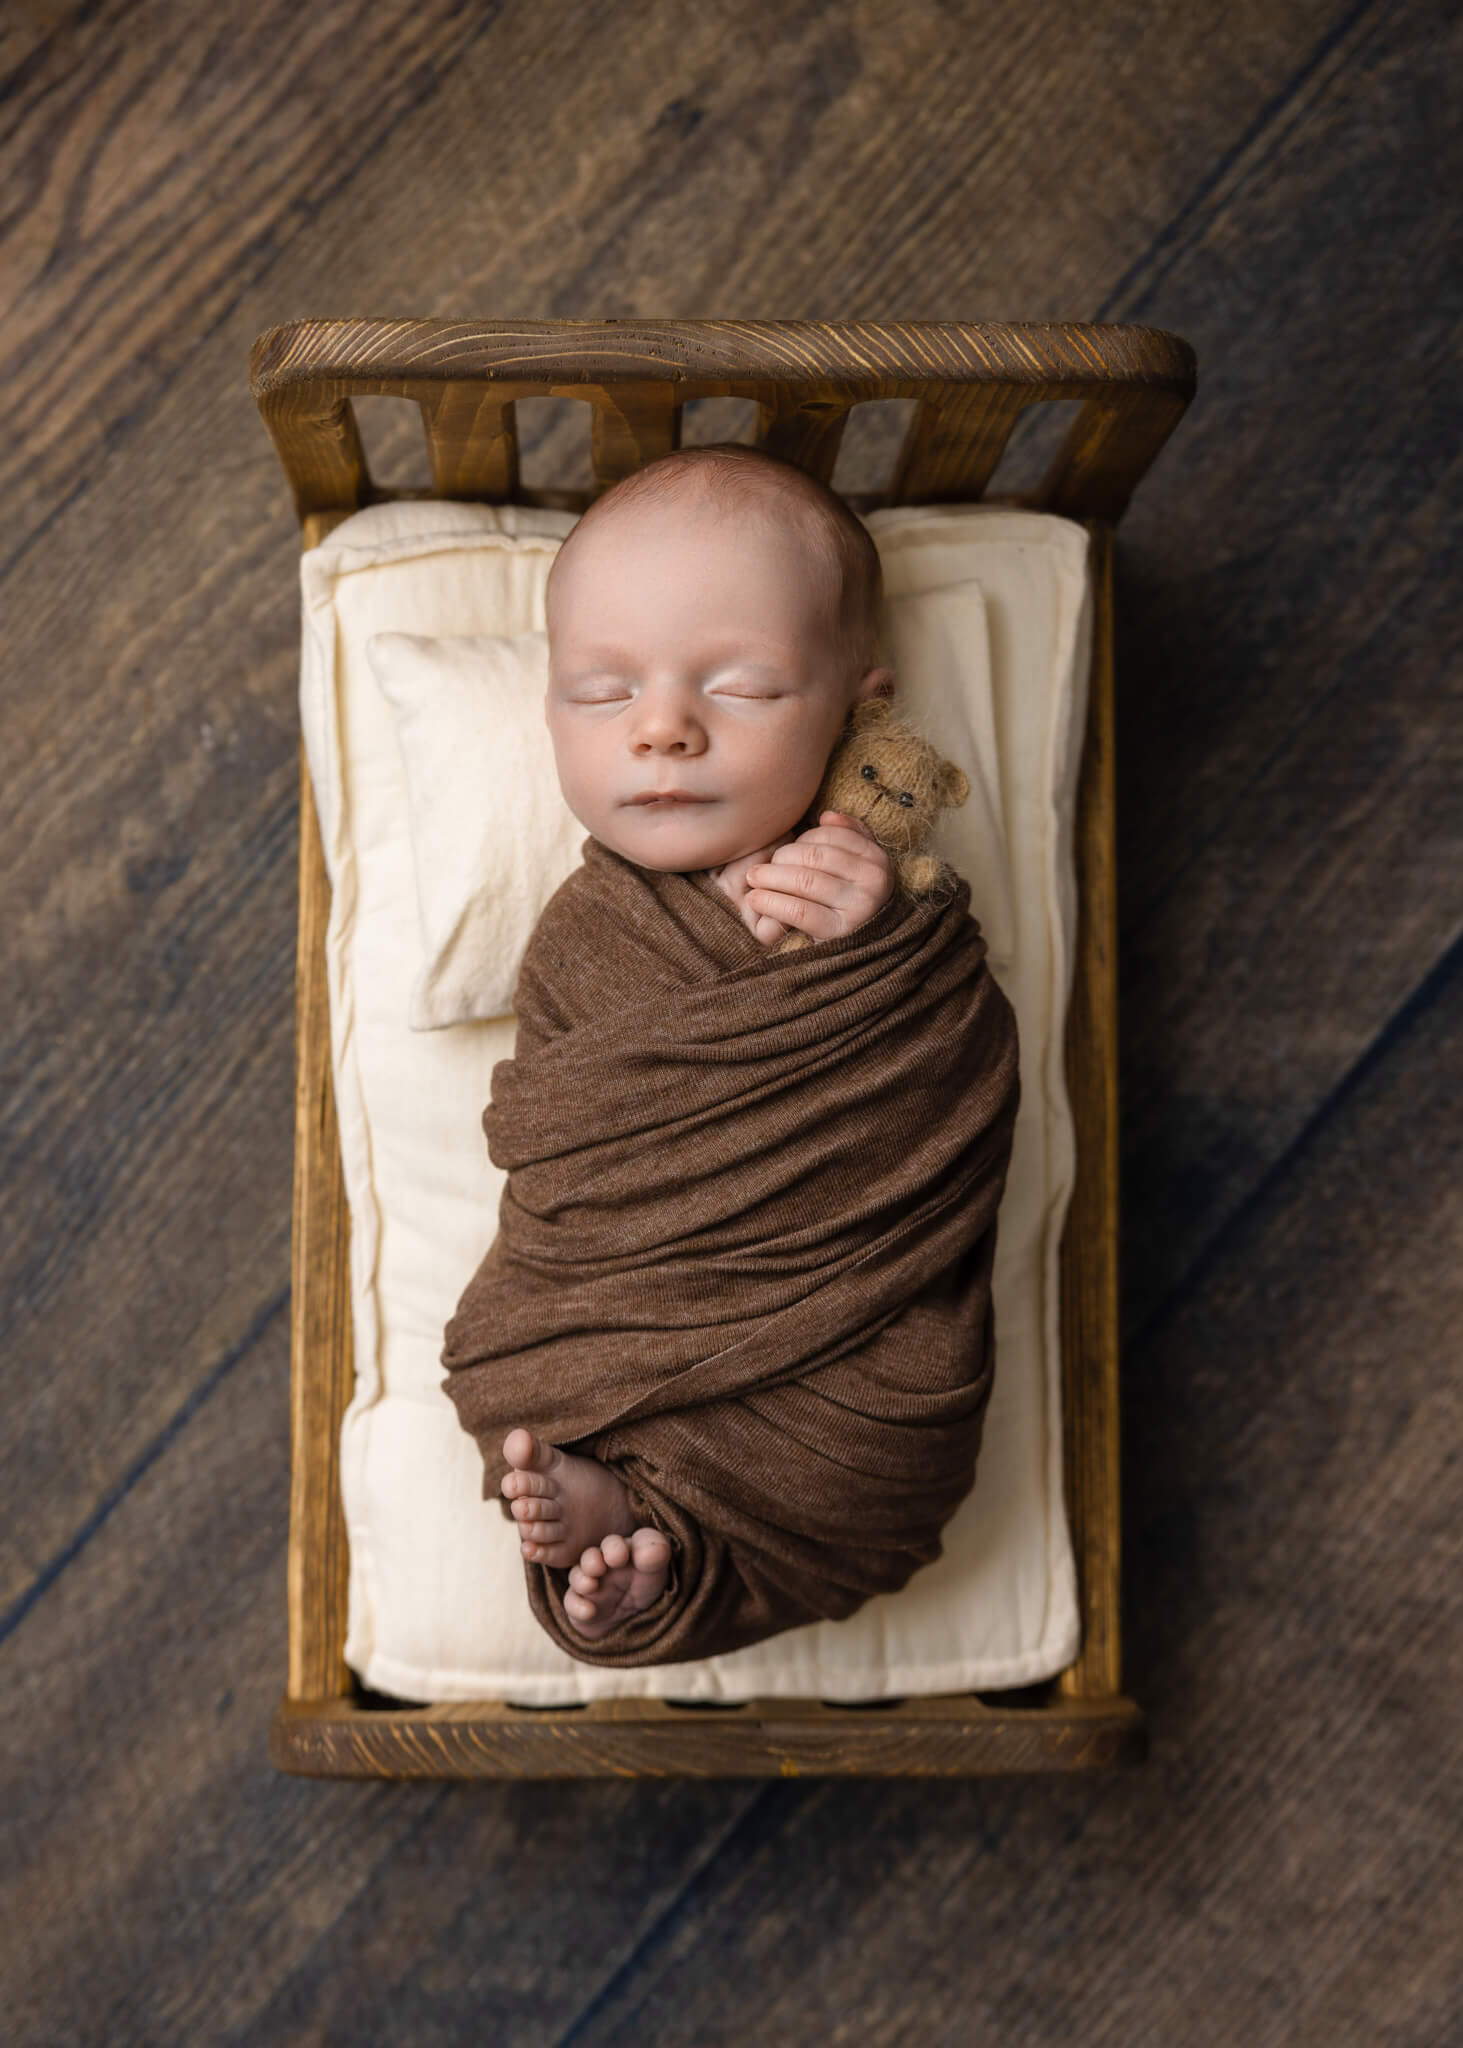 newborn baby asleep in a tiny wooden bed wrapped in a brown blanket holding a tiny teddy bear